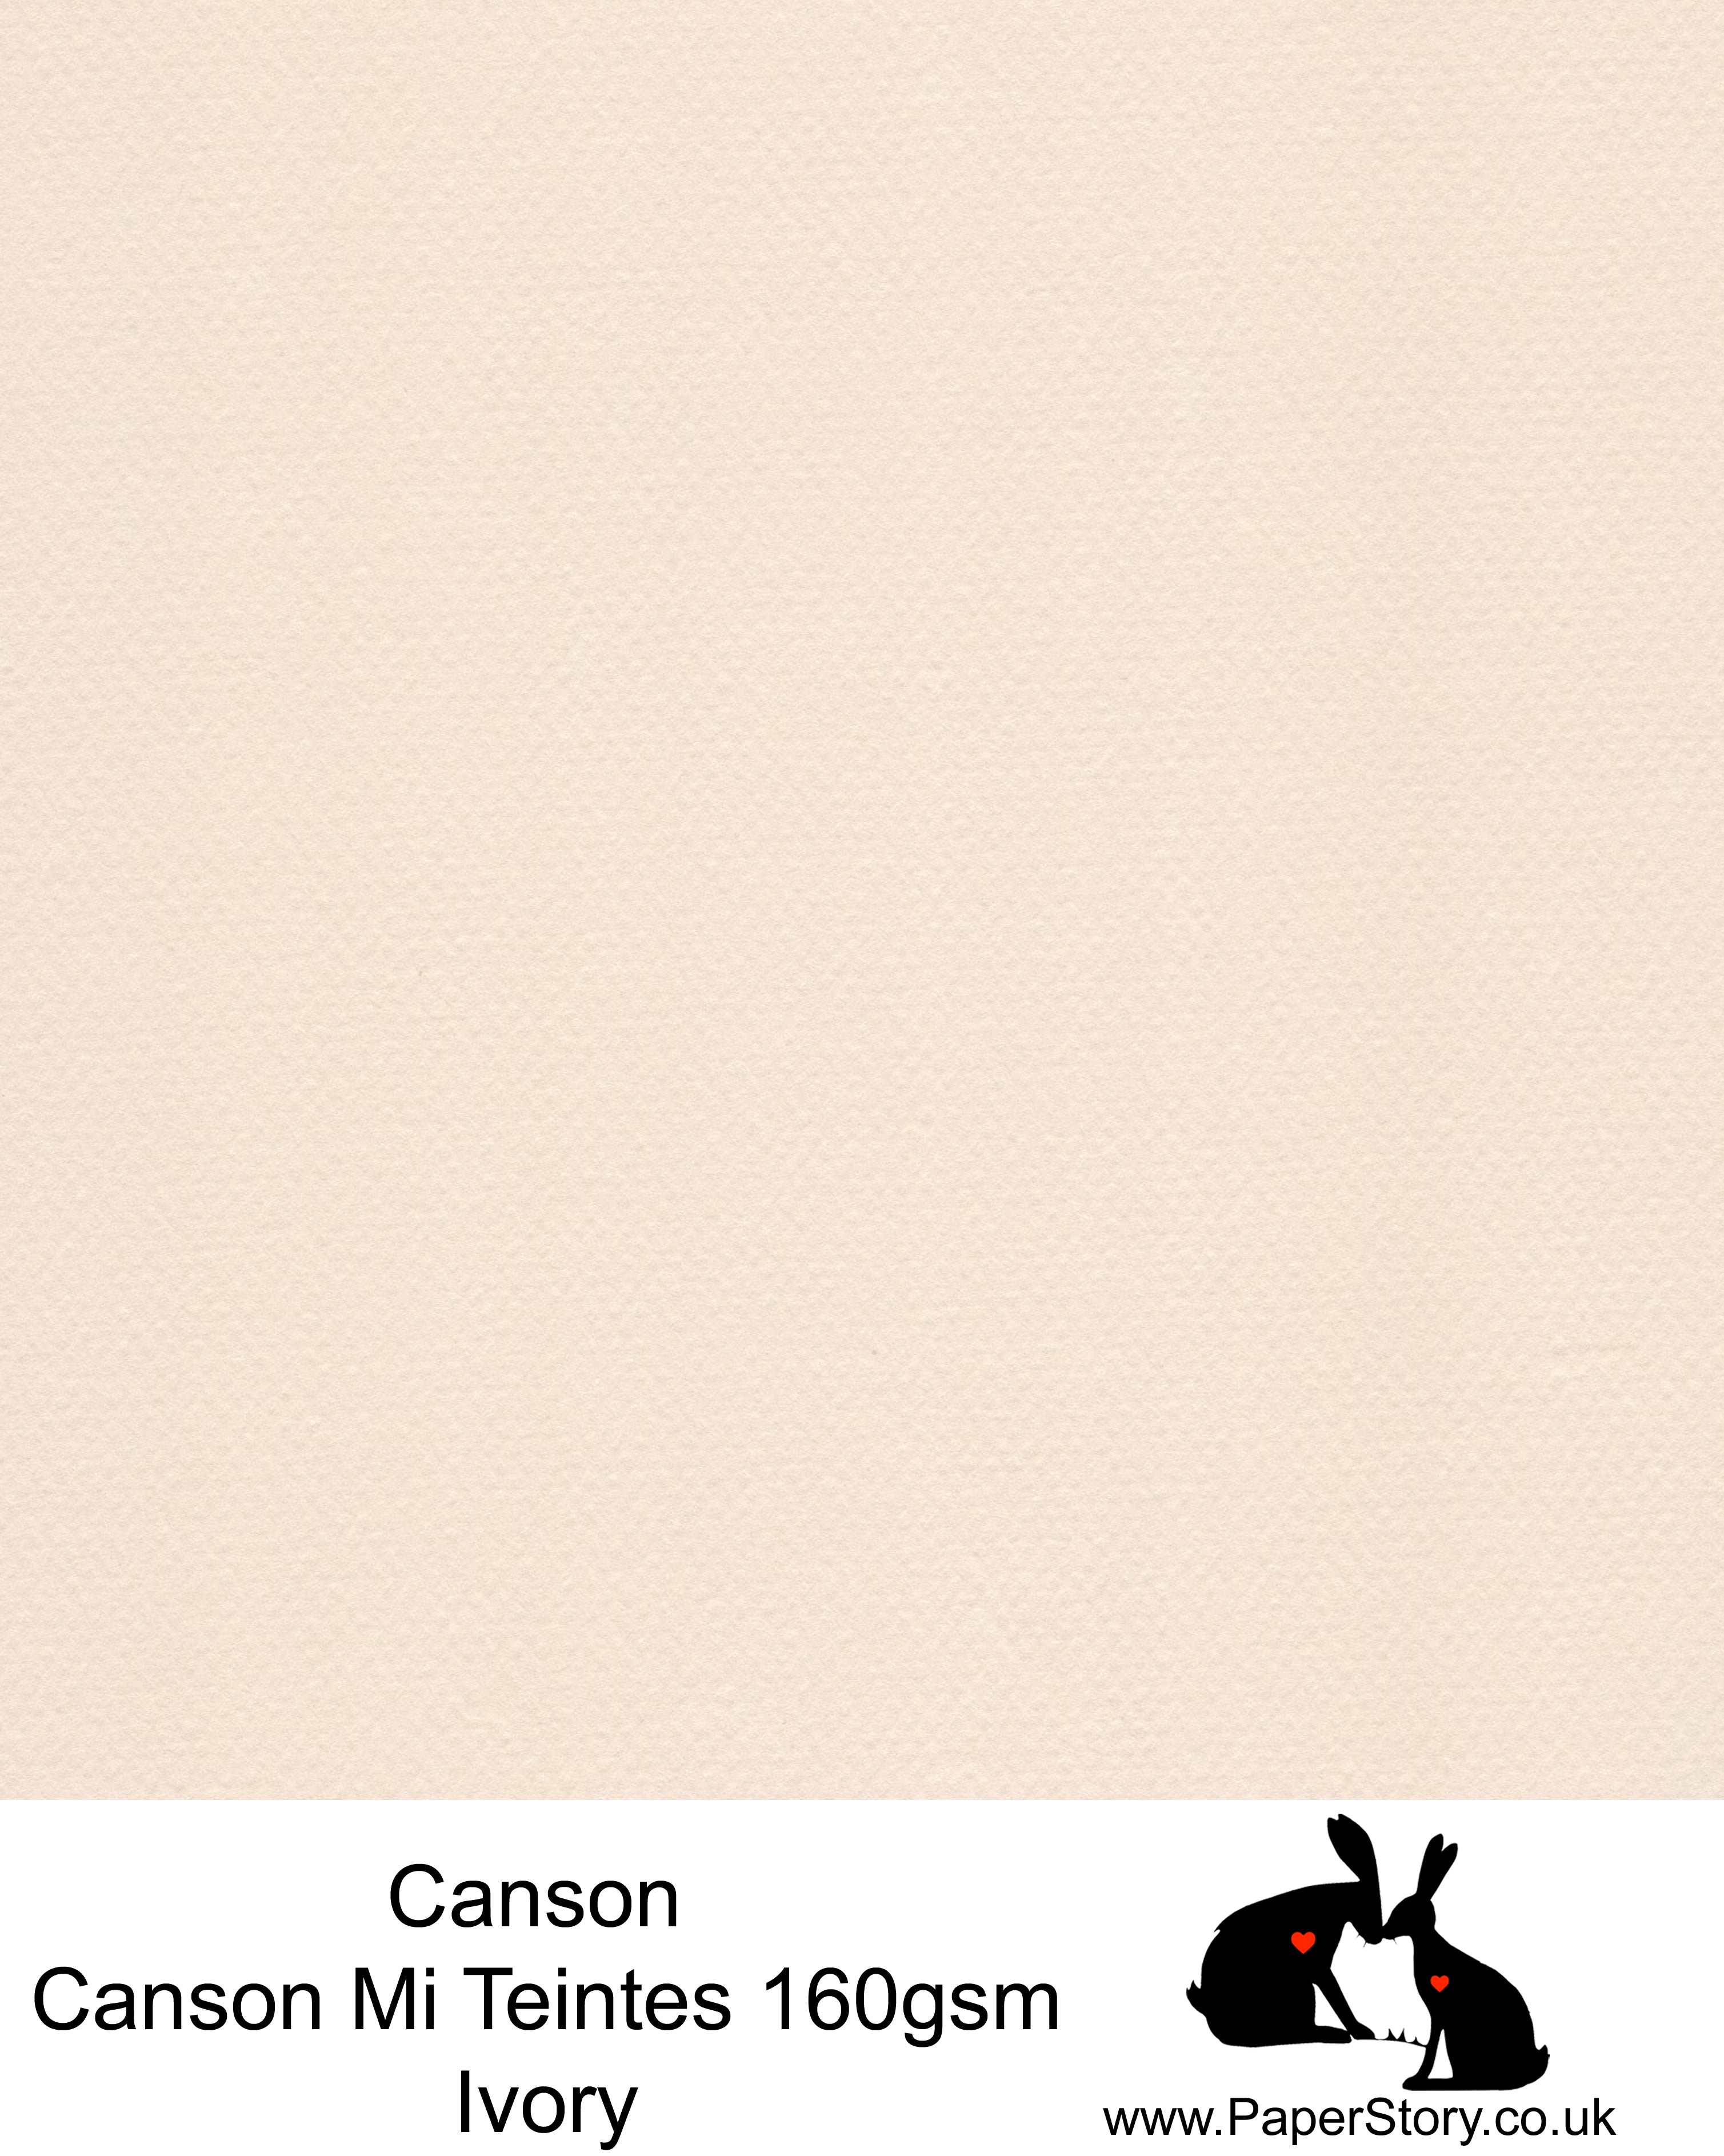 Canson Mi Teintes acid free, Ivory hammered texture honeycomb surface paper 160 gsm. This is a popular and classic paper for all artists especially well respected for Pastel  and Papercutting made famous by Paper Panda. This paper has a honeycombed finish one side and fine grain the other. An authentic art paper, acid free with a  very high 50% cotton content. Canson Mi-Teintes complies with the ISO 9706 standard on permanence, a guarantee of excellent conservation  